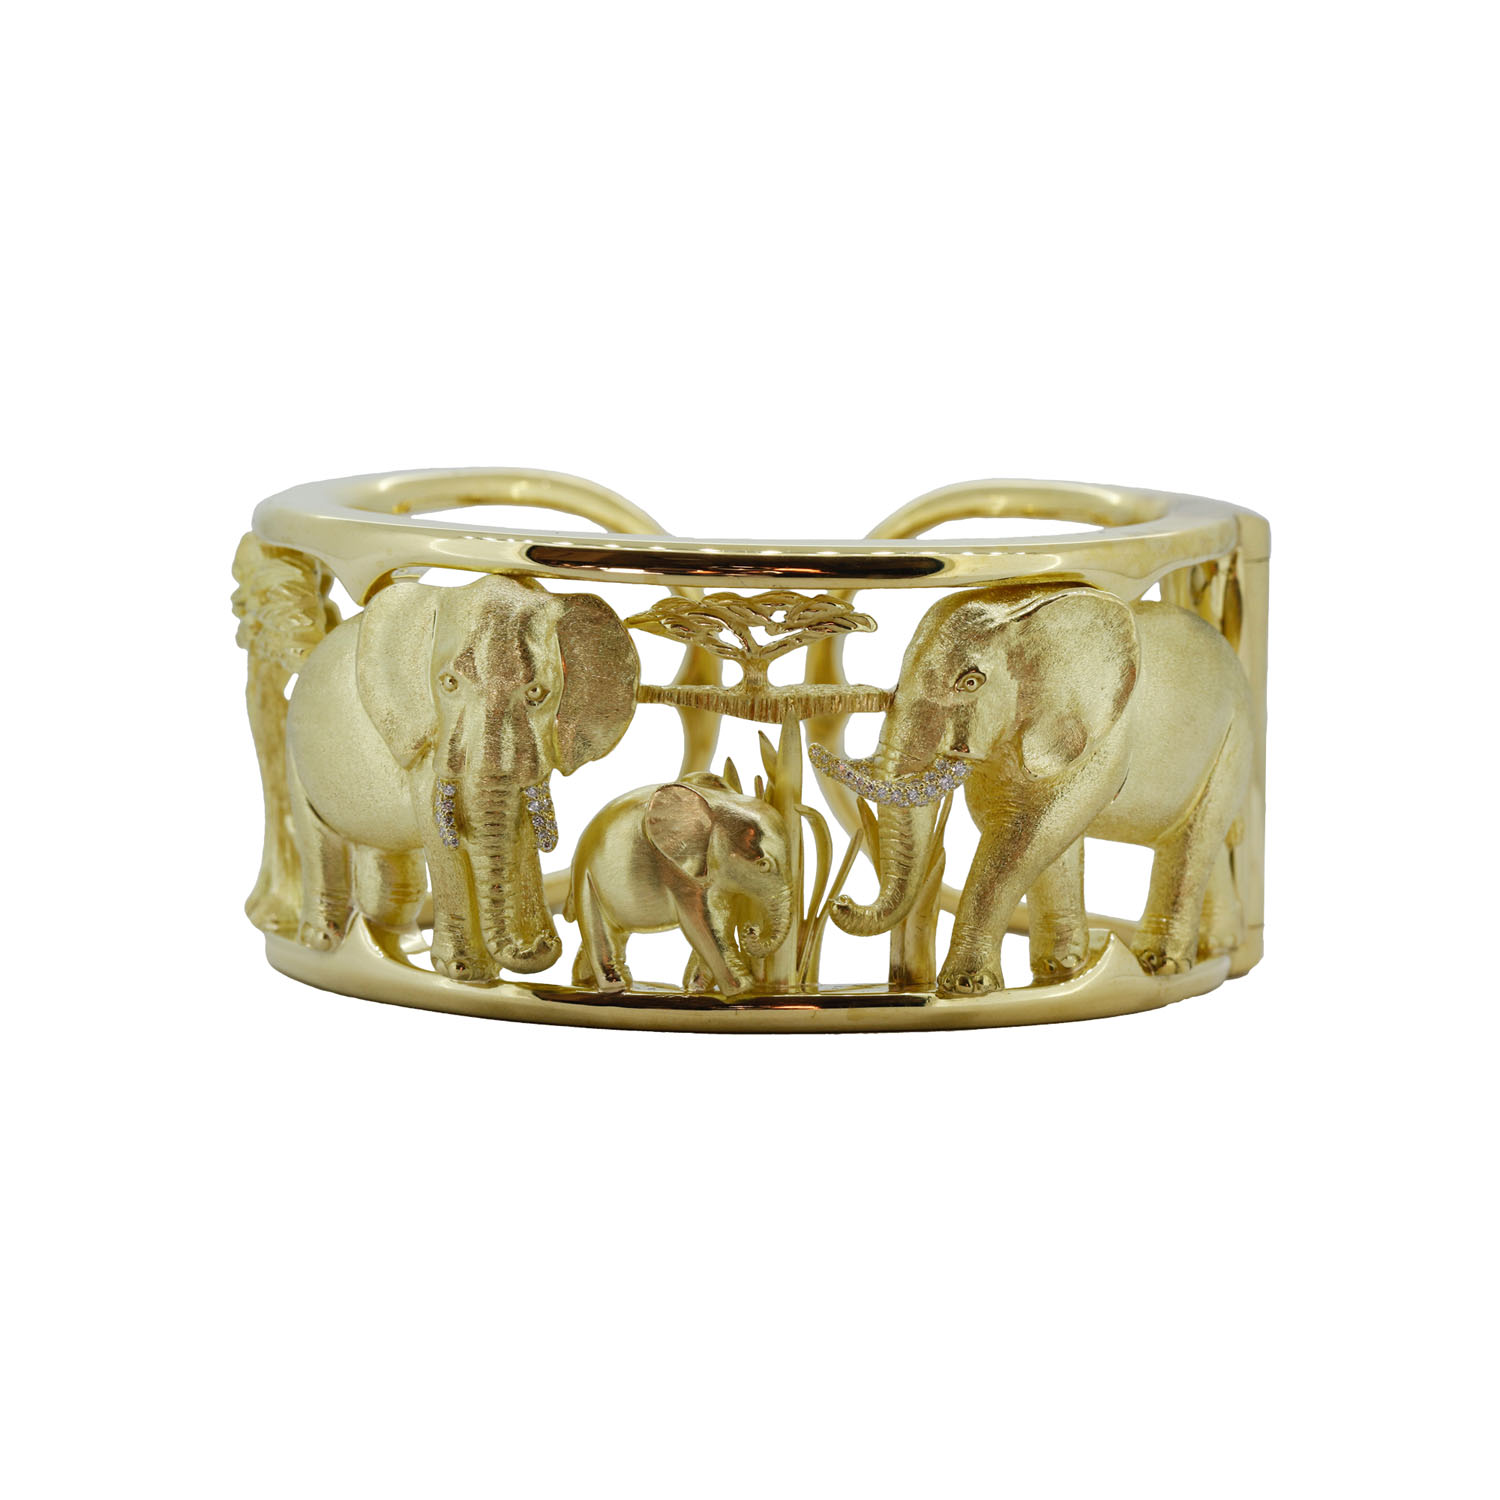 Gold bracelet handcrafted by Frank Alexander Jewell